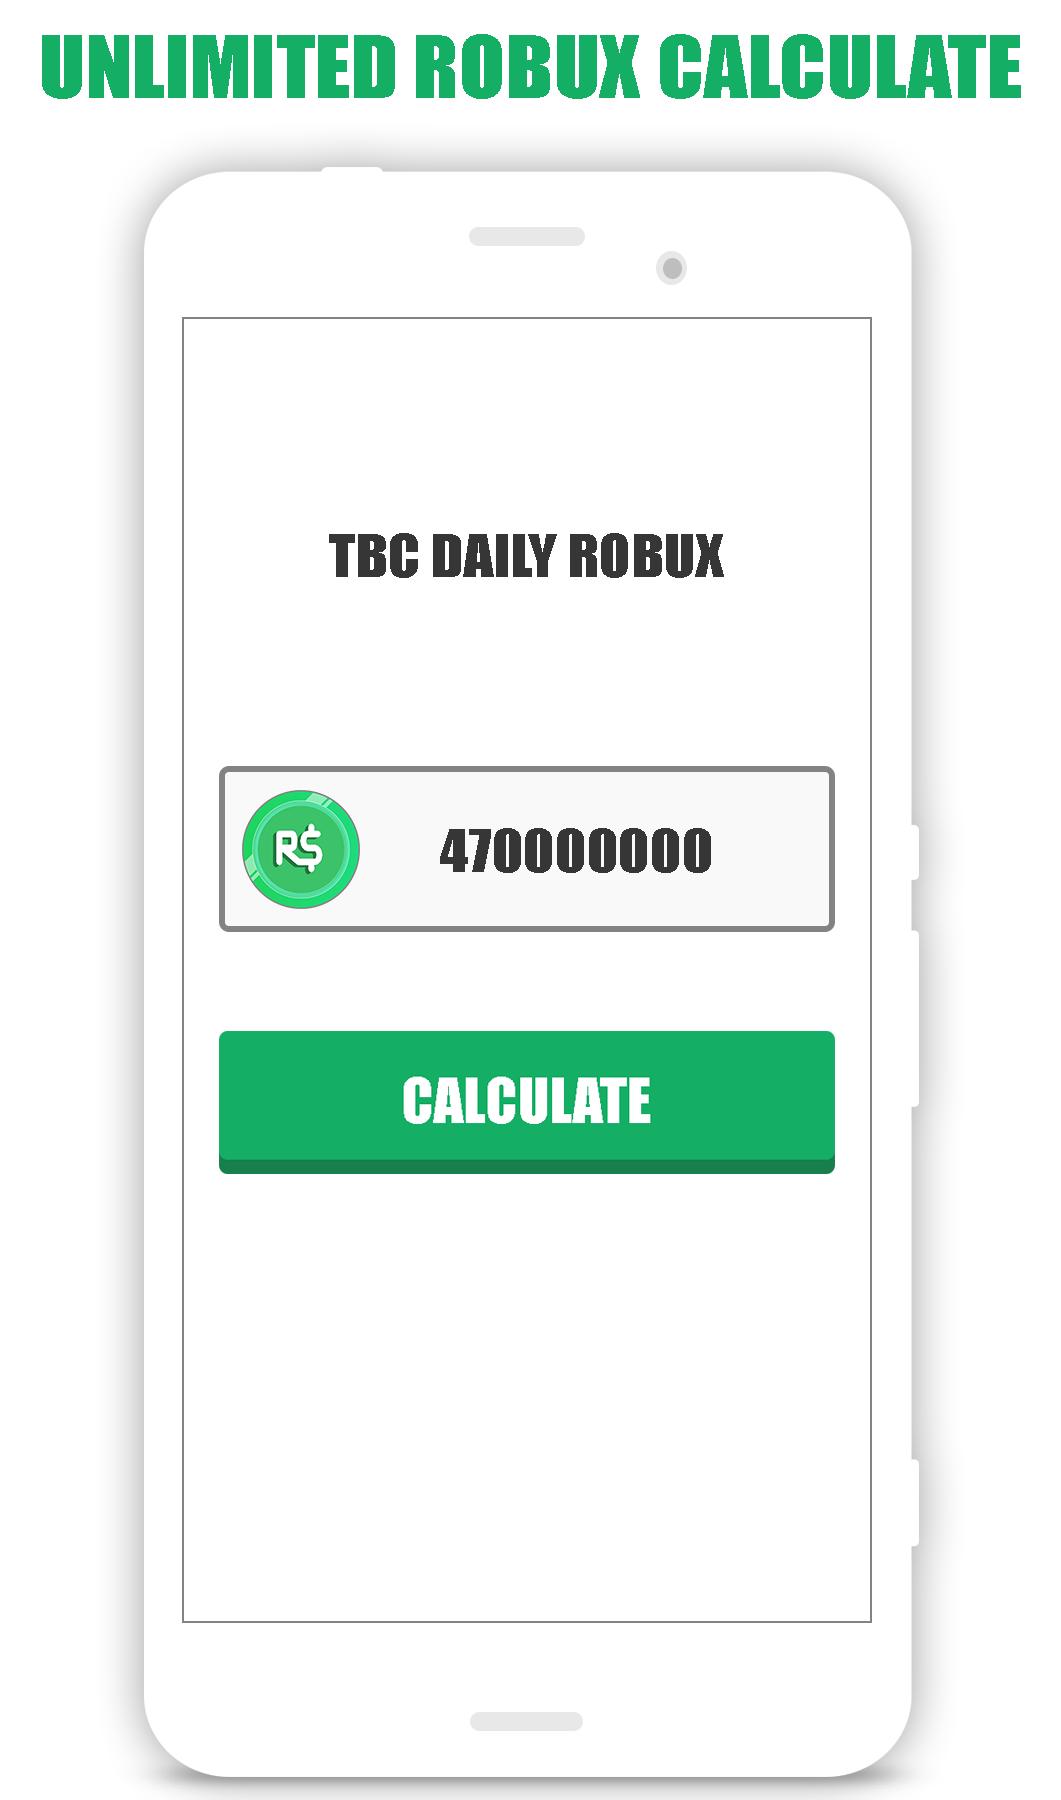 Free Robux Calculator For Roblox For Android Apk Download - roblox builder club download